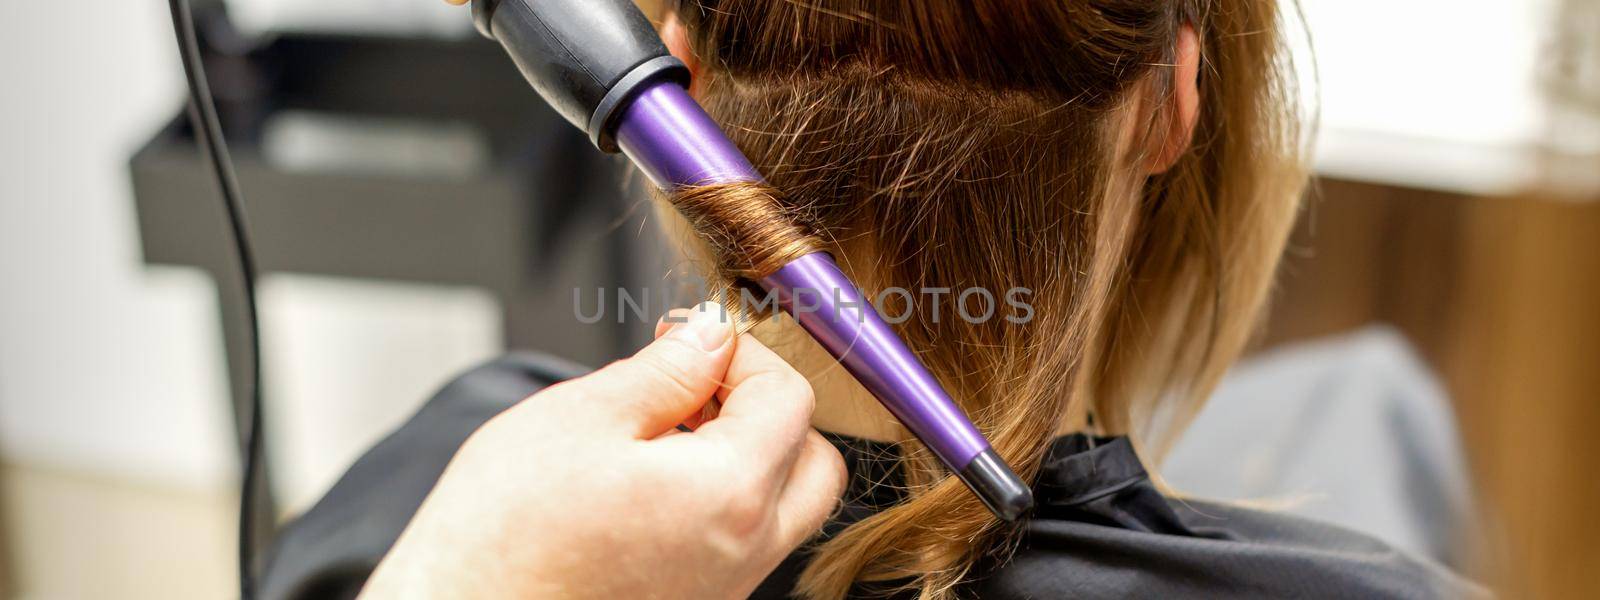 The hairstylist makes curls hairstyle of long brown hair with the curling iron in hairdresser salon, close up. by okskukuruza